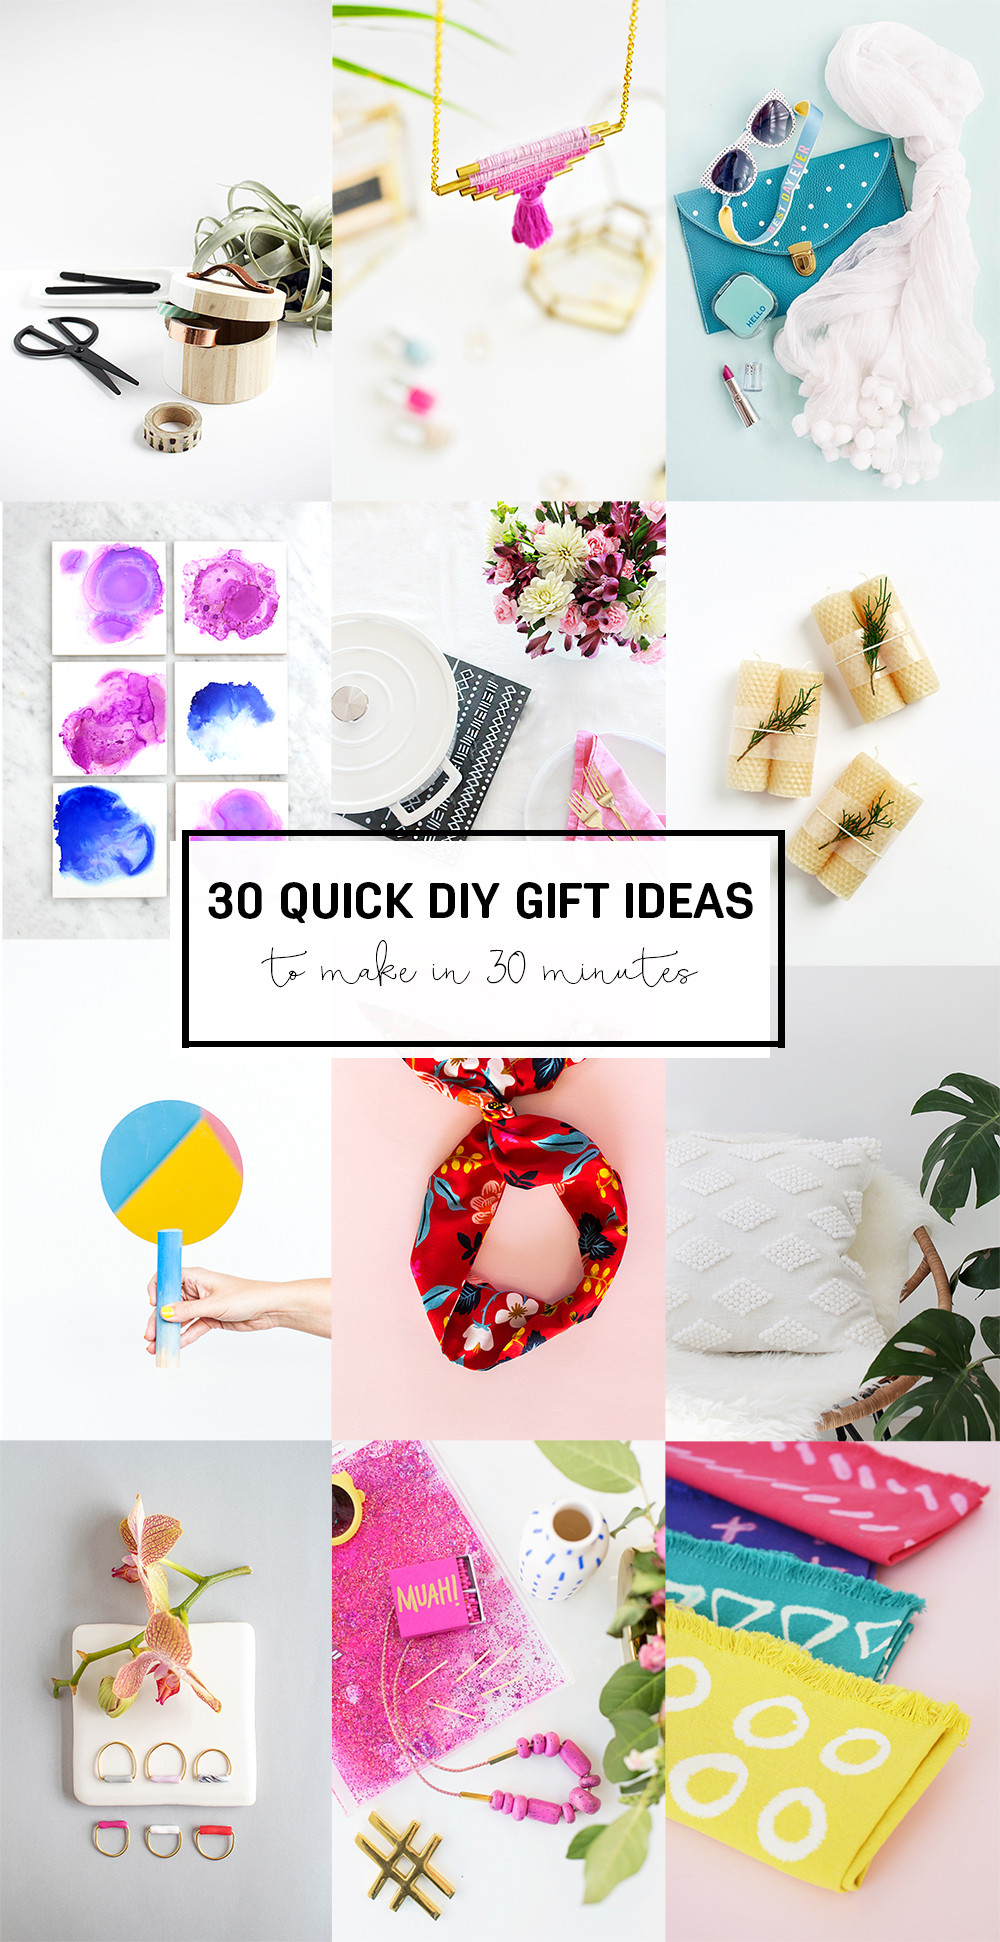 Quick DIY Gifts
 30 Quick DIY Gift Ideas to make in 30 minutes